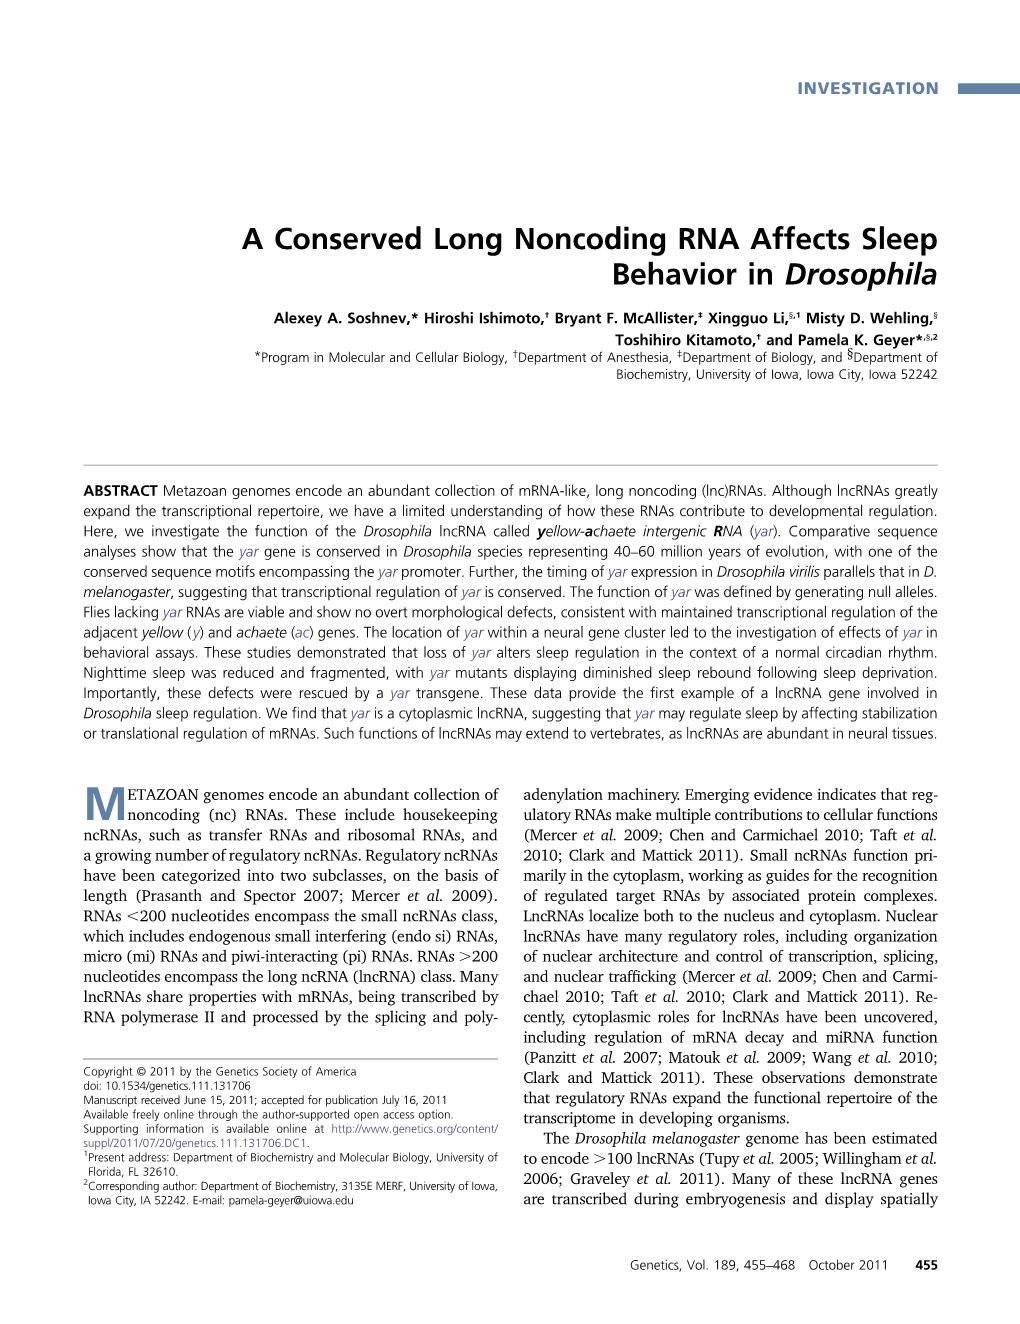 A Conserved Long Noncoding RNA Affects Sleep Behavior in Drosophila